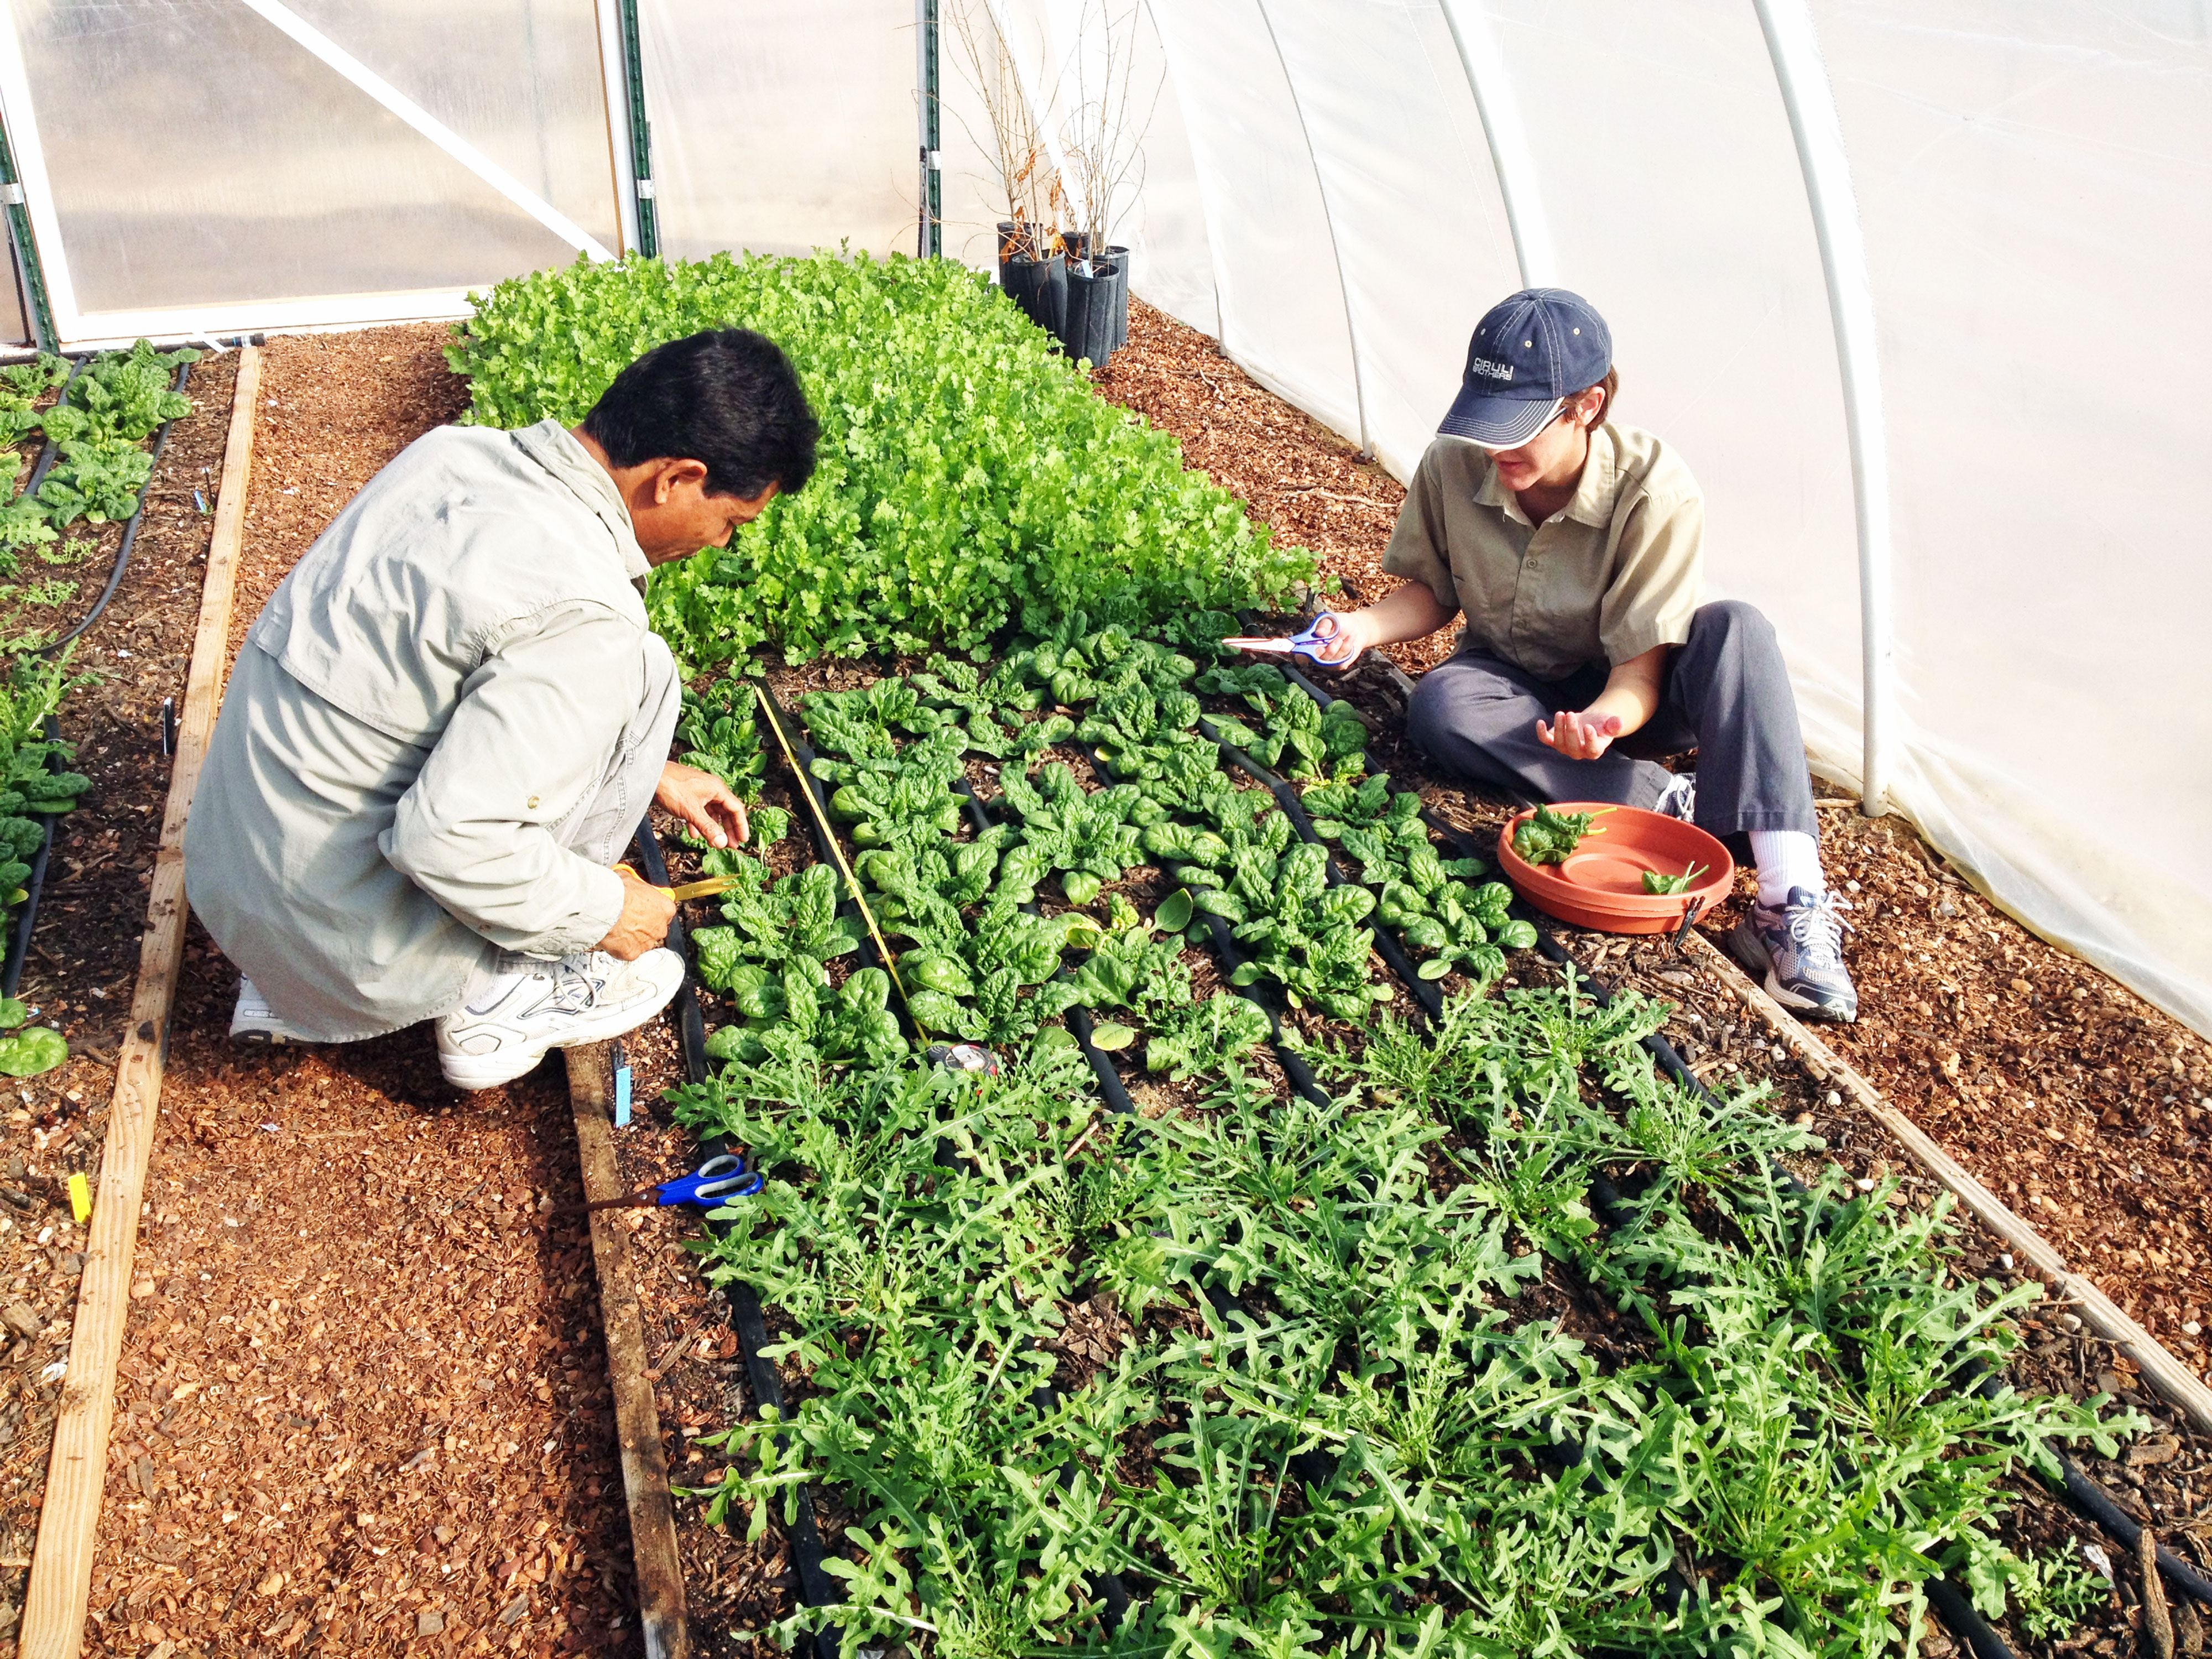 Students studying horticulture practices